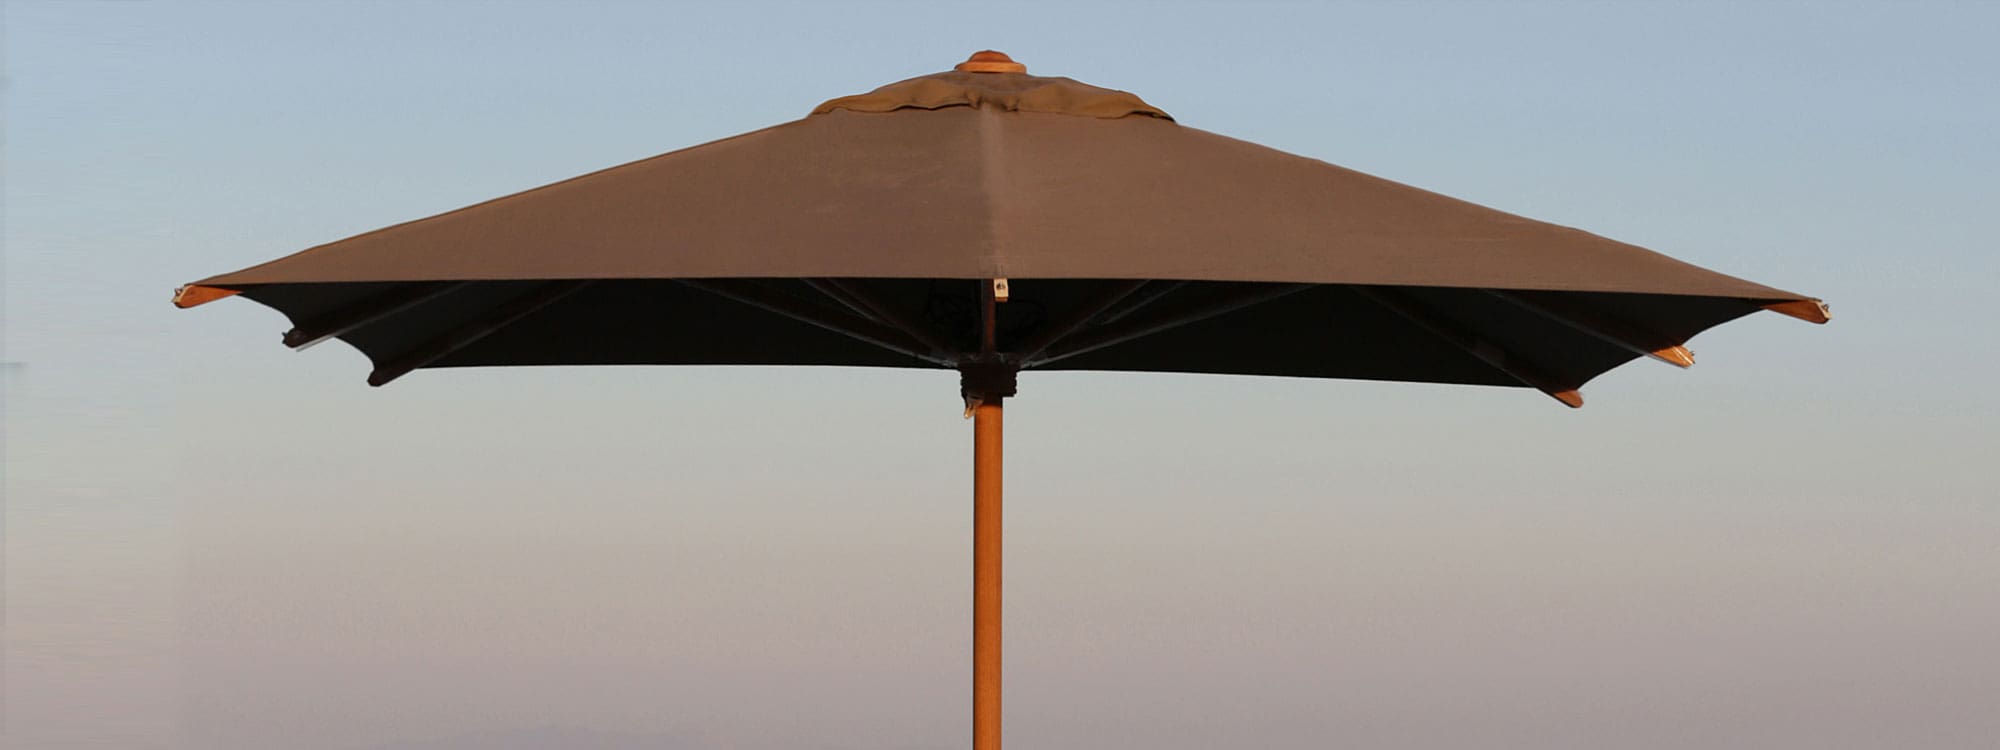 Image of Shady classic Teak parasol with cappuccino canopy by Royal Botania